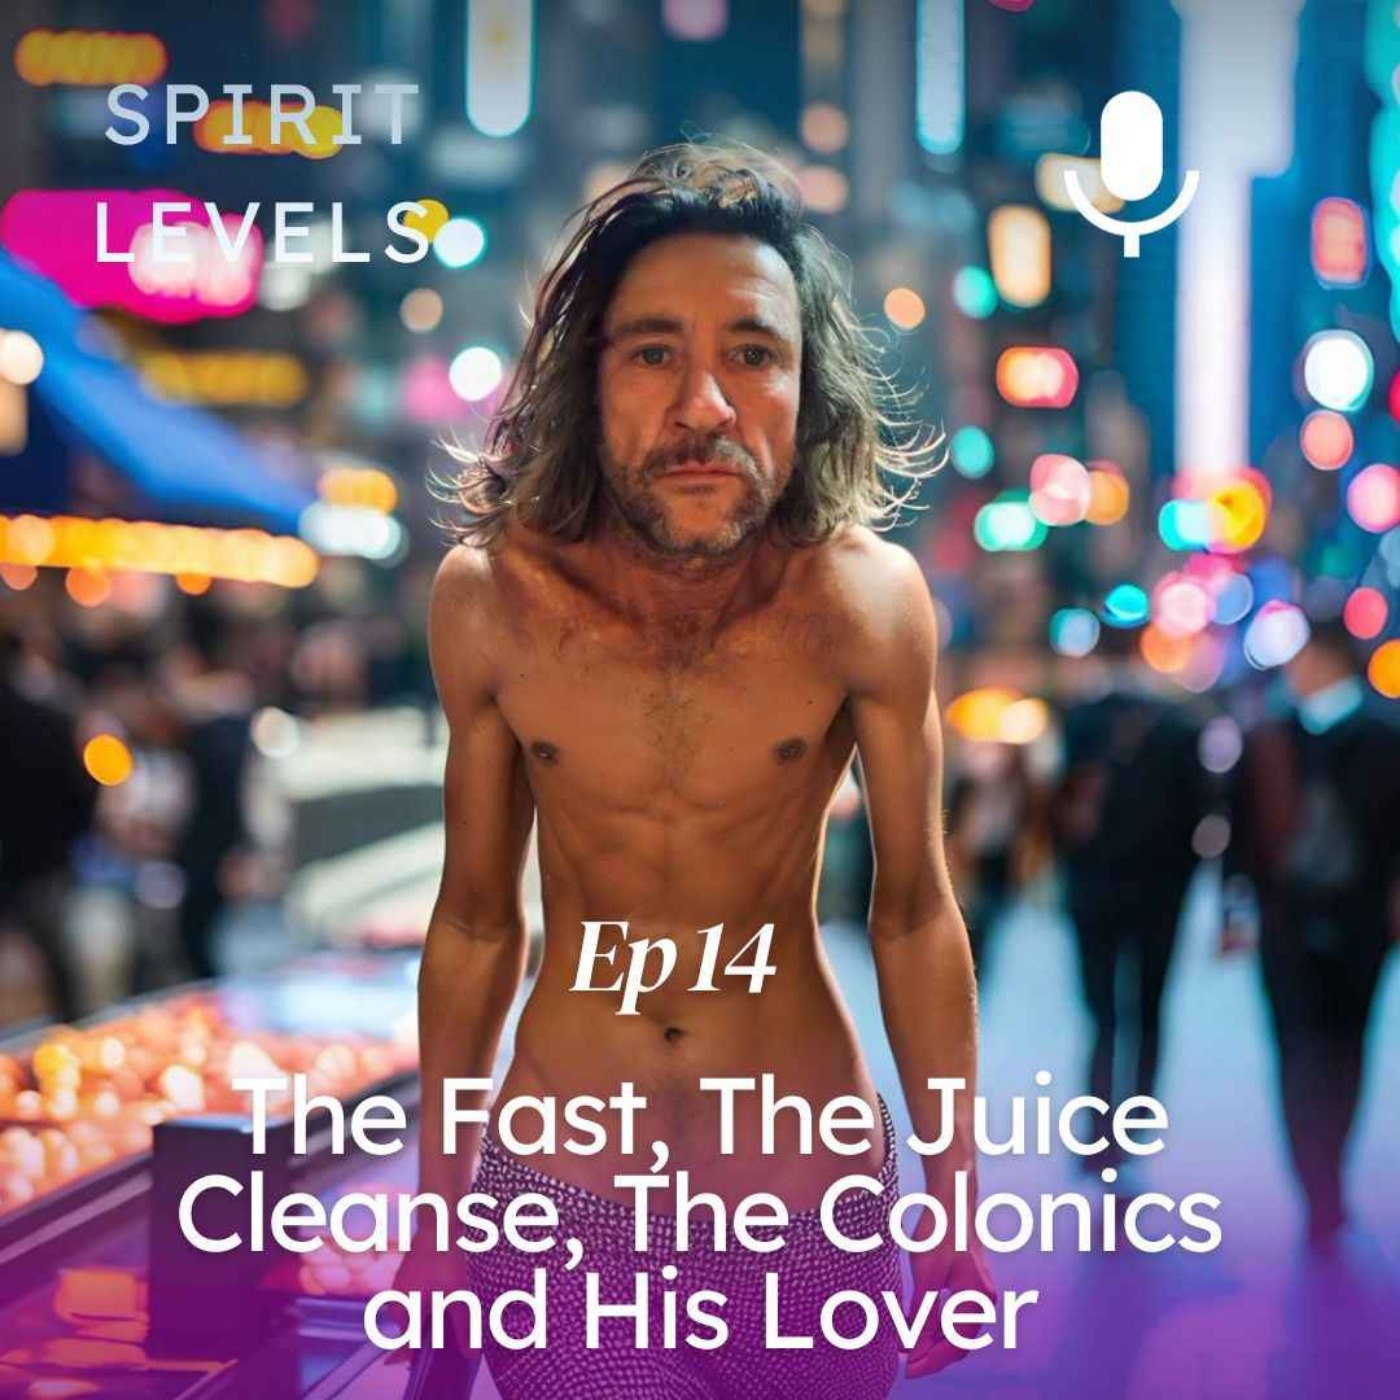 The Fast, the Juice Cleanse, the Colonics and His Lover